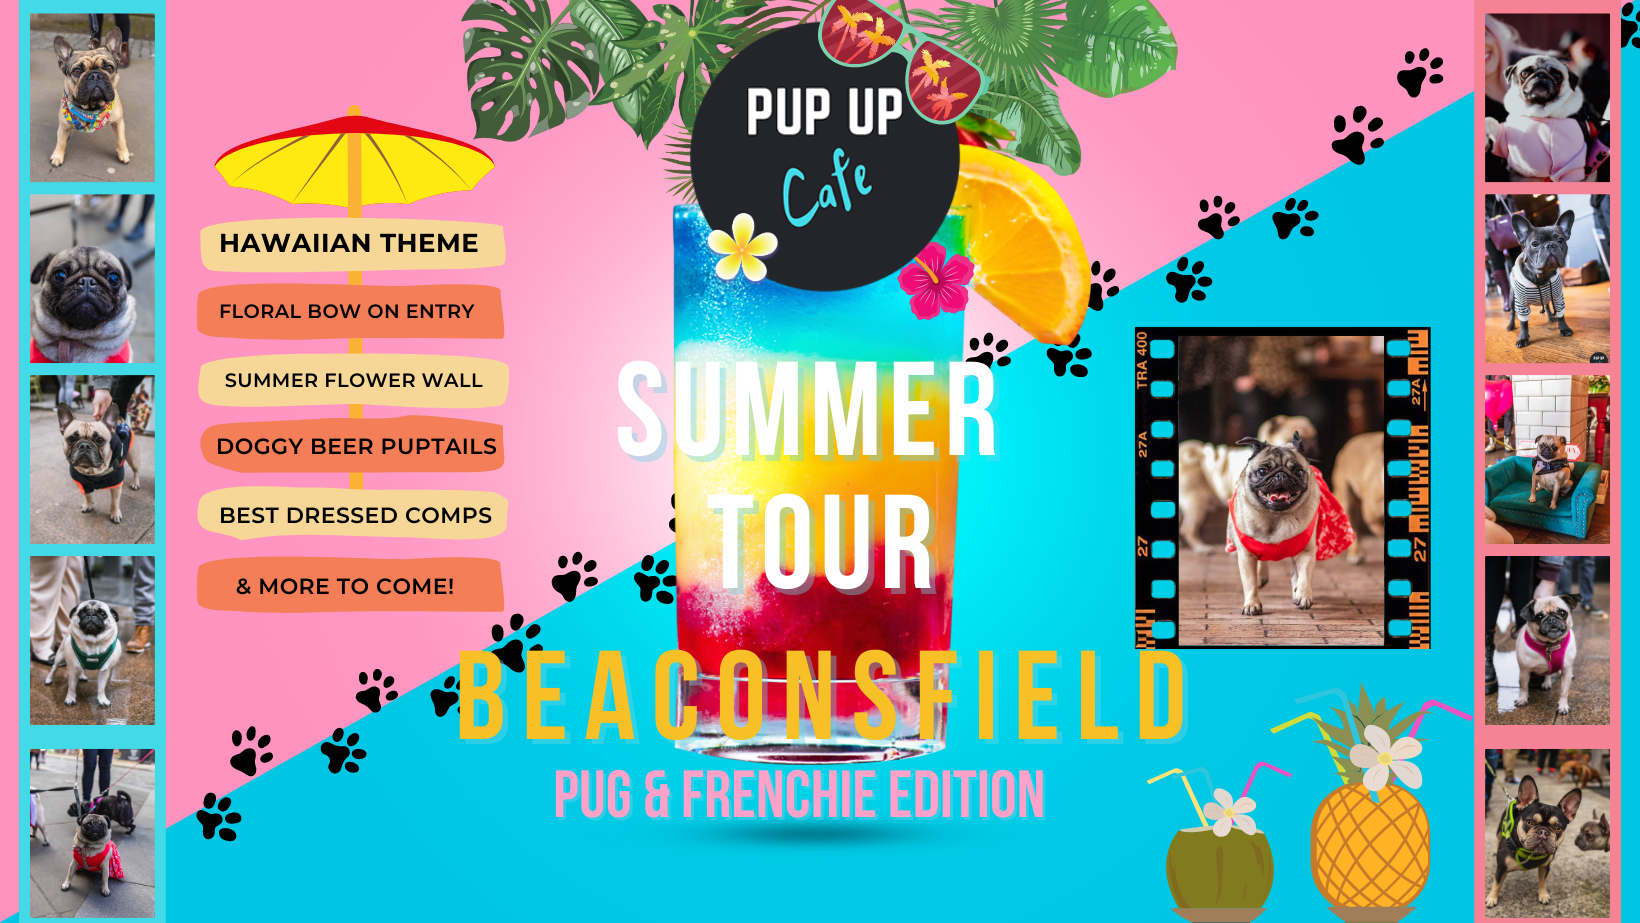 Pug/Frenchie Pup Up Cafe – Beaconsfield | SUMMER TOUR! 🌞